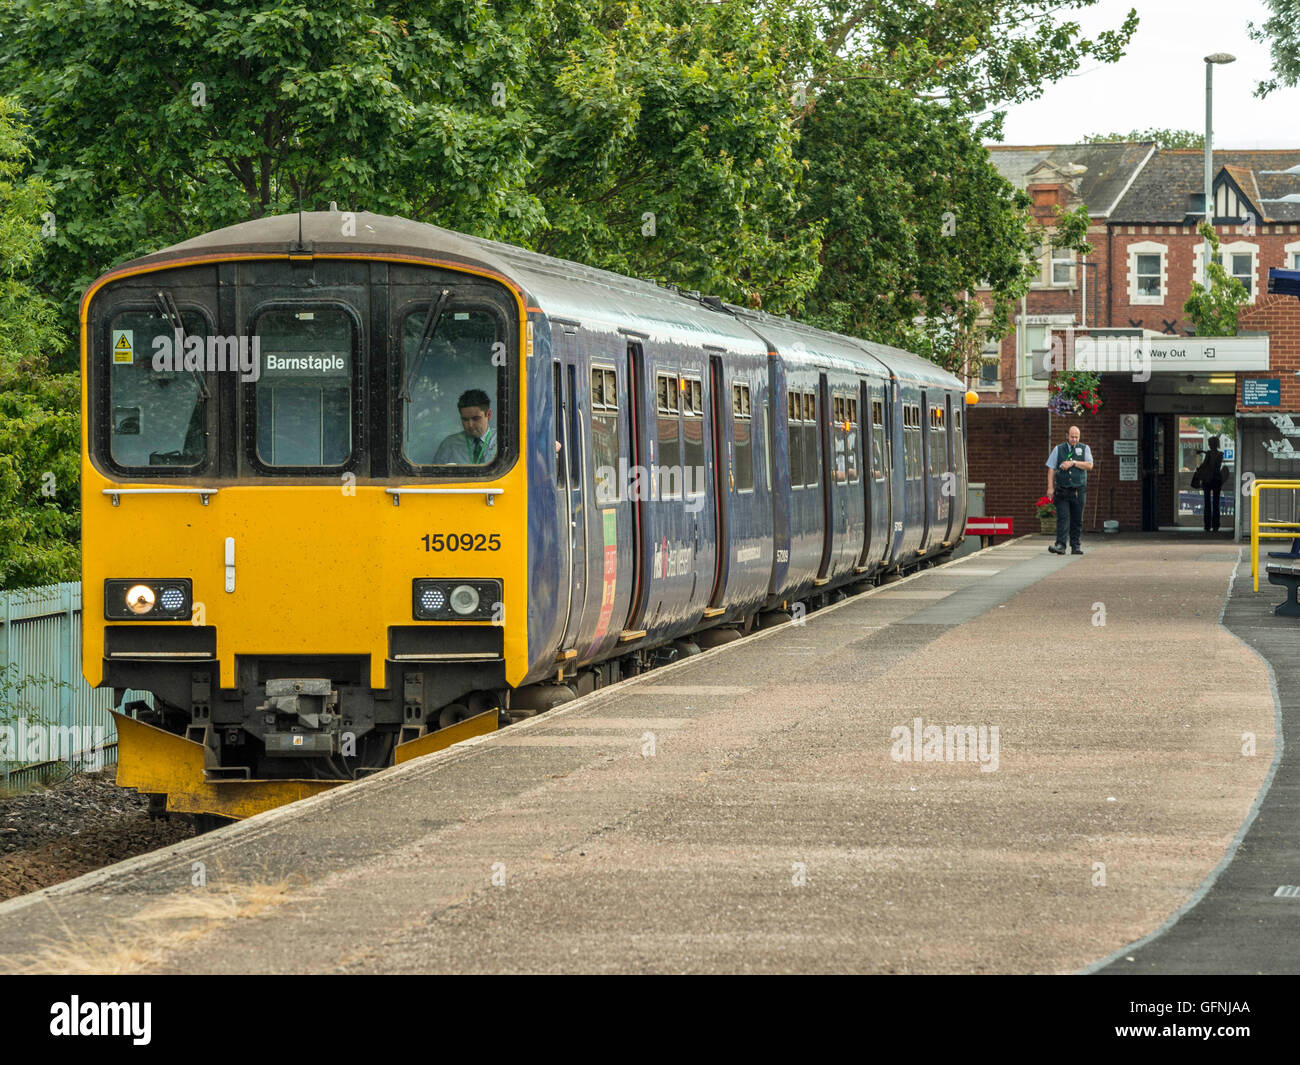 Great Western Train formed of three carriages waits at Exmouth Station bound for Barnstaple along the picturesque Avocet line. Stock Photo